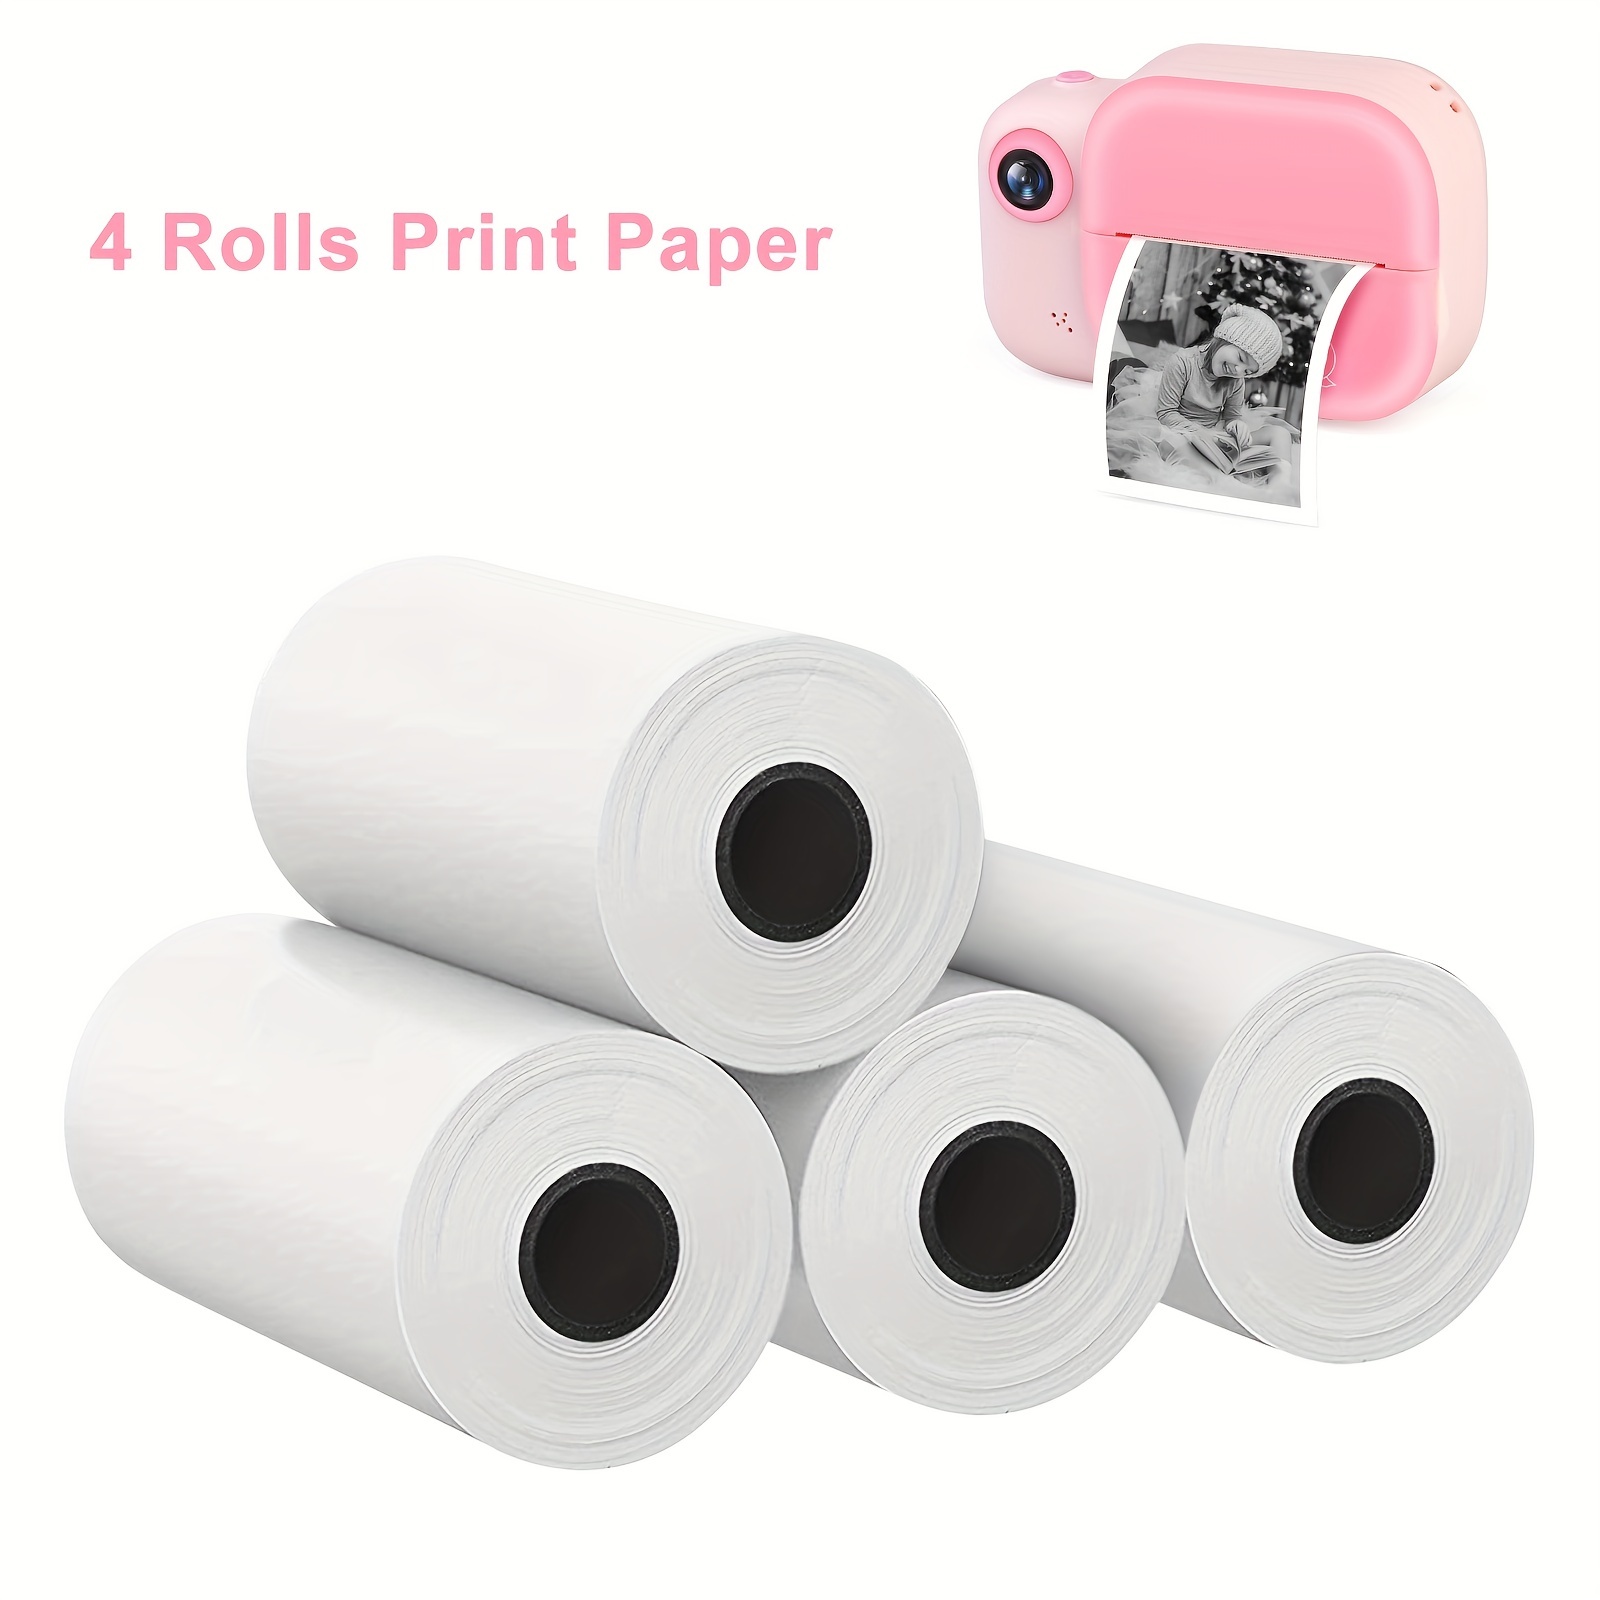 Thermal Paper 5.59 X 3.99 CmInstant Camera Supply Printer Paper Printing  Camera Supplies Cheap Printer Thermal Paper (White)